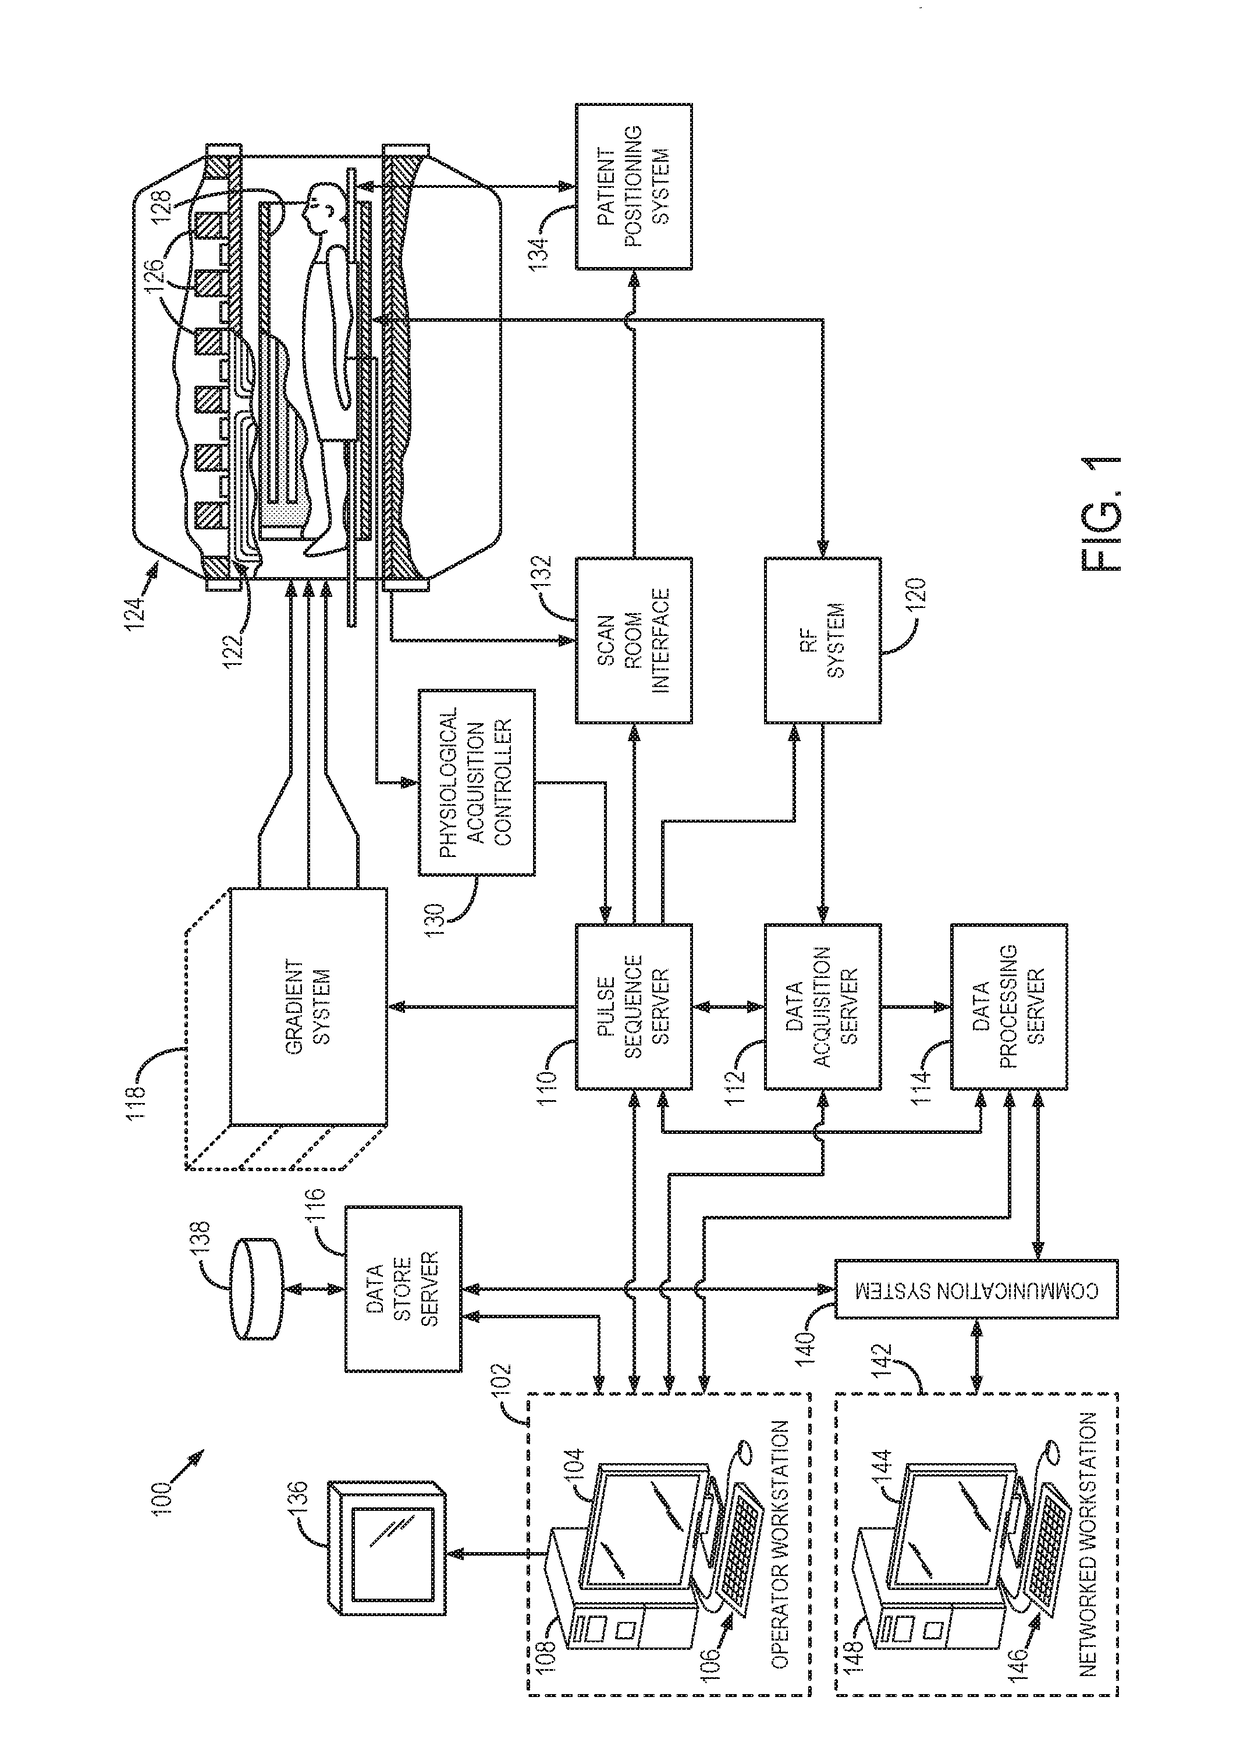 System and Method For Phase-Contrast MRI with Hybrid One-and Two-sided Flow Encoding and Velocity Spectrum Separation (HOTSPA)